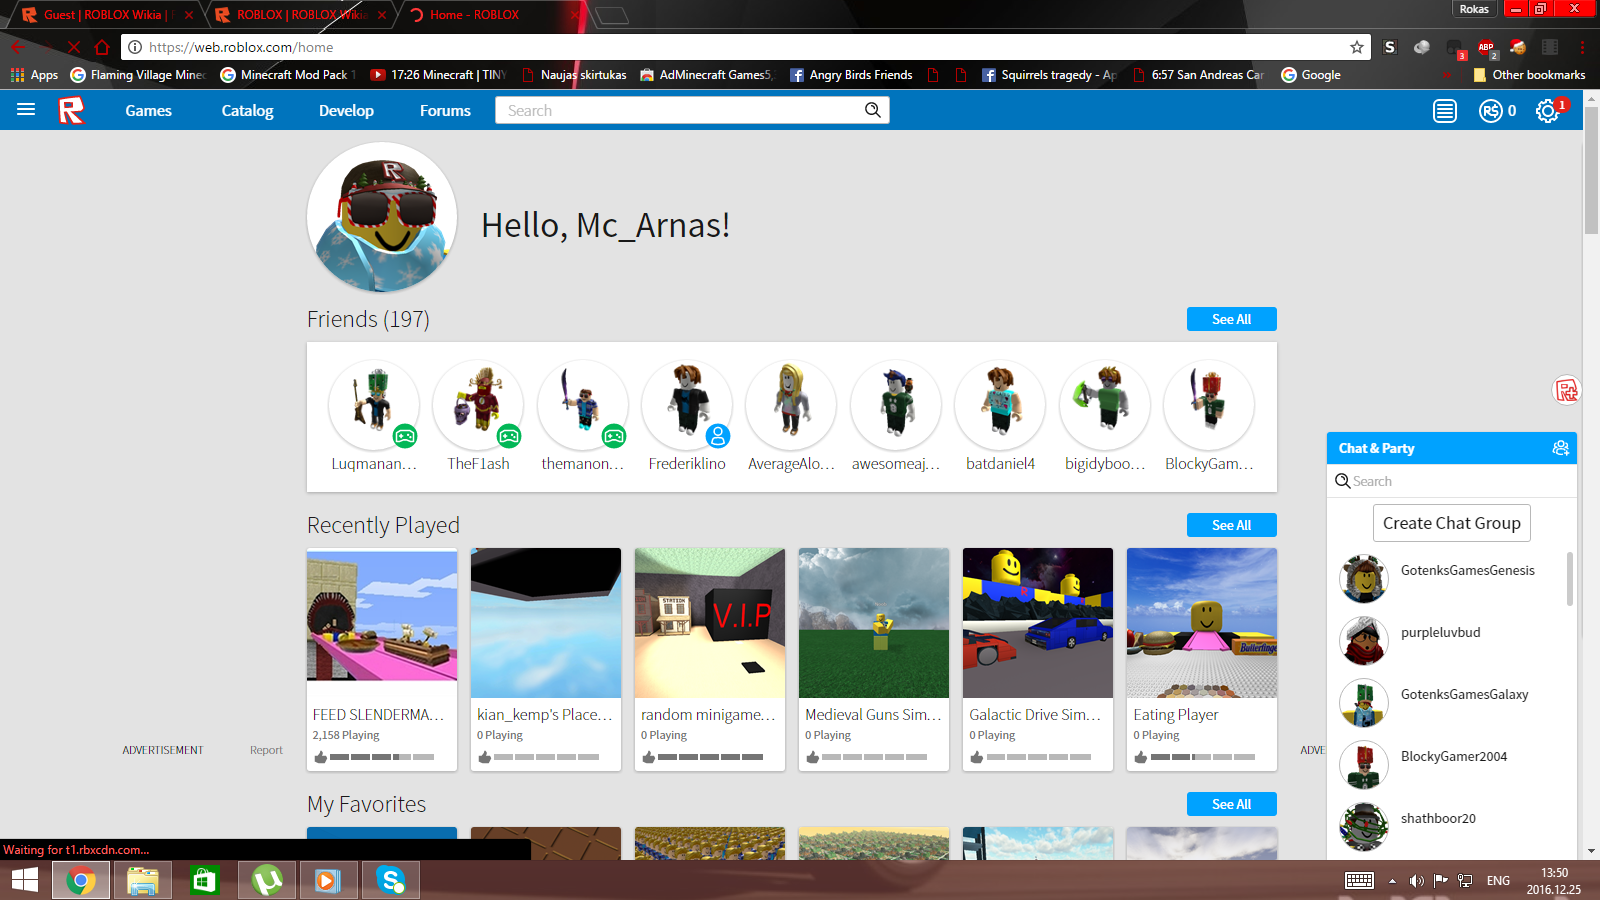 roblox home page 2020